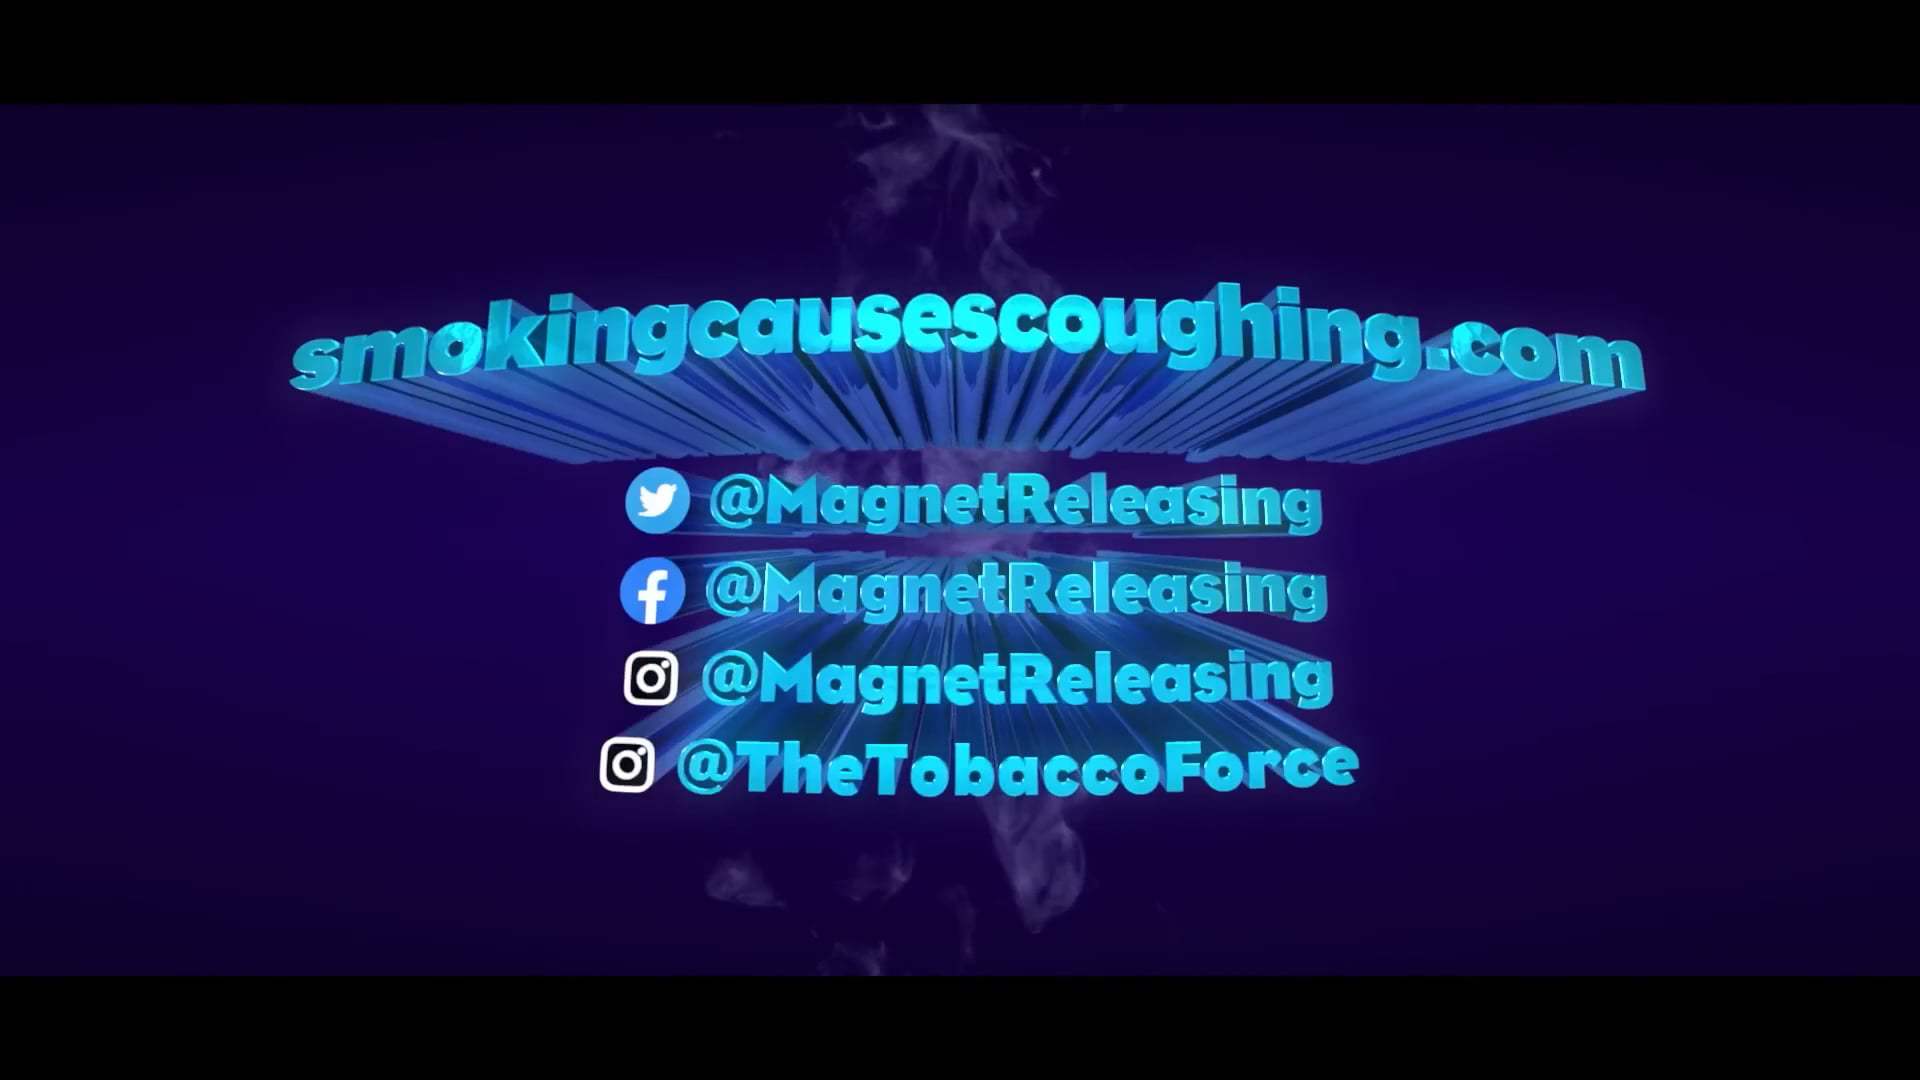 Smoking Causes Coughing Trailer (2013) Screen Capture #4